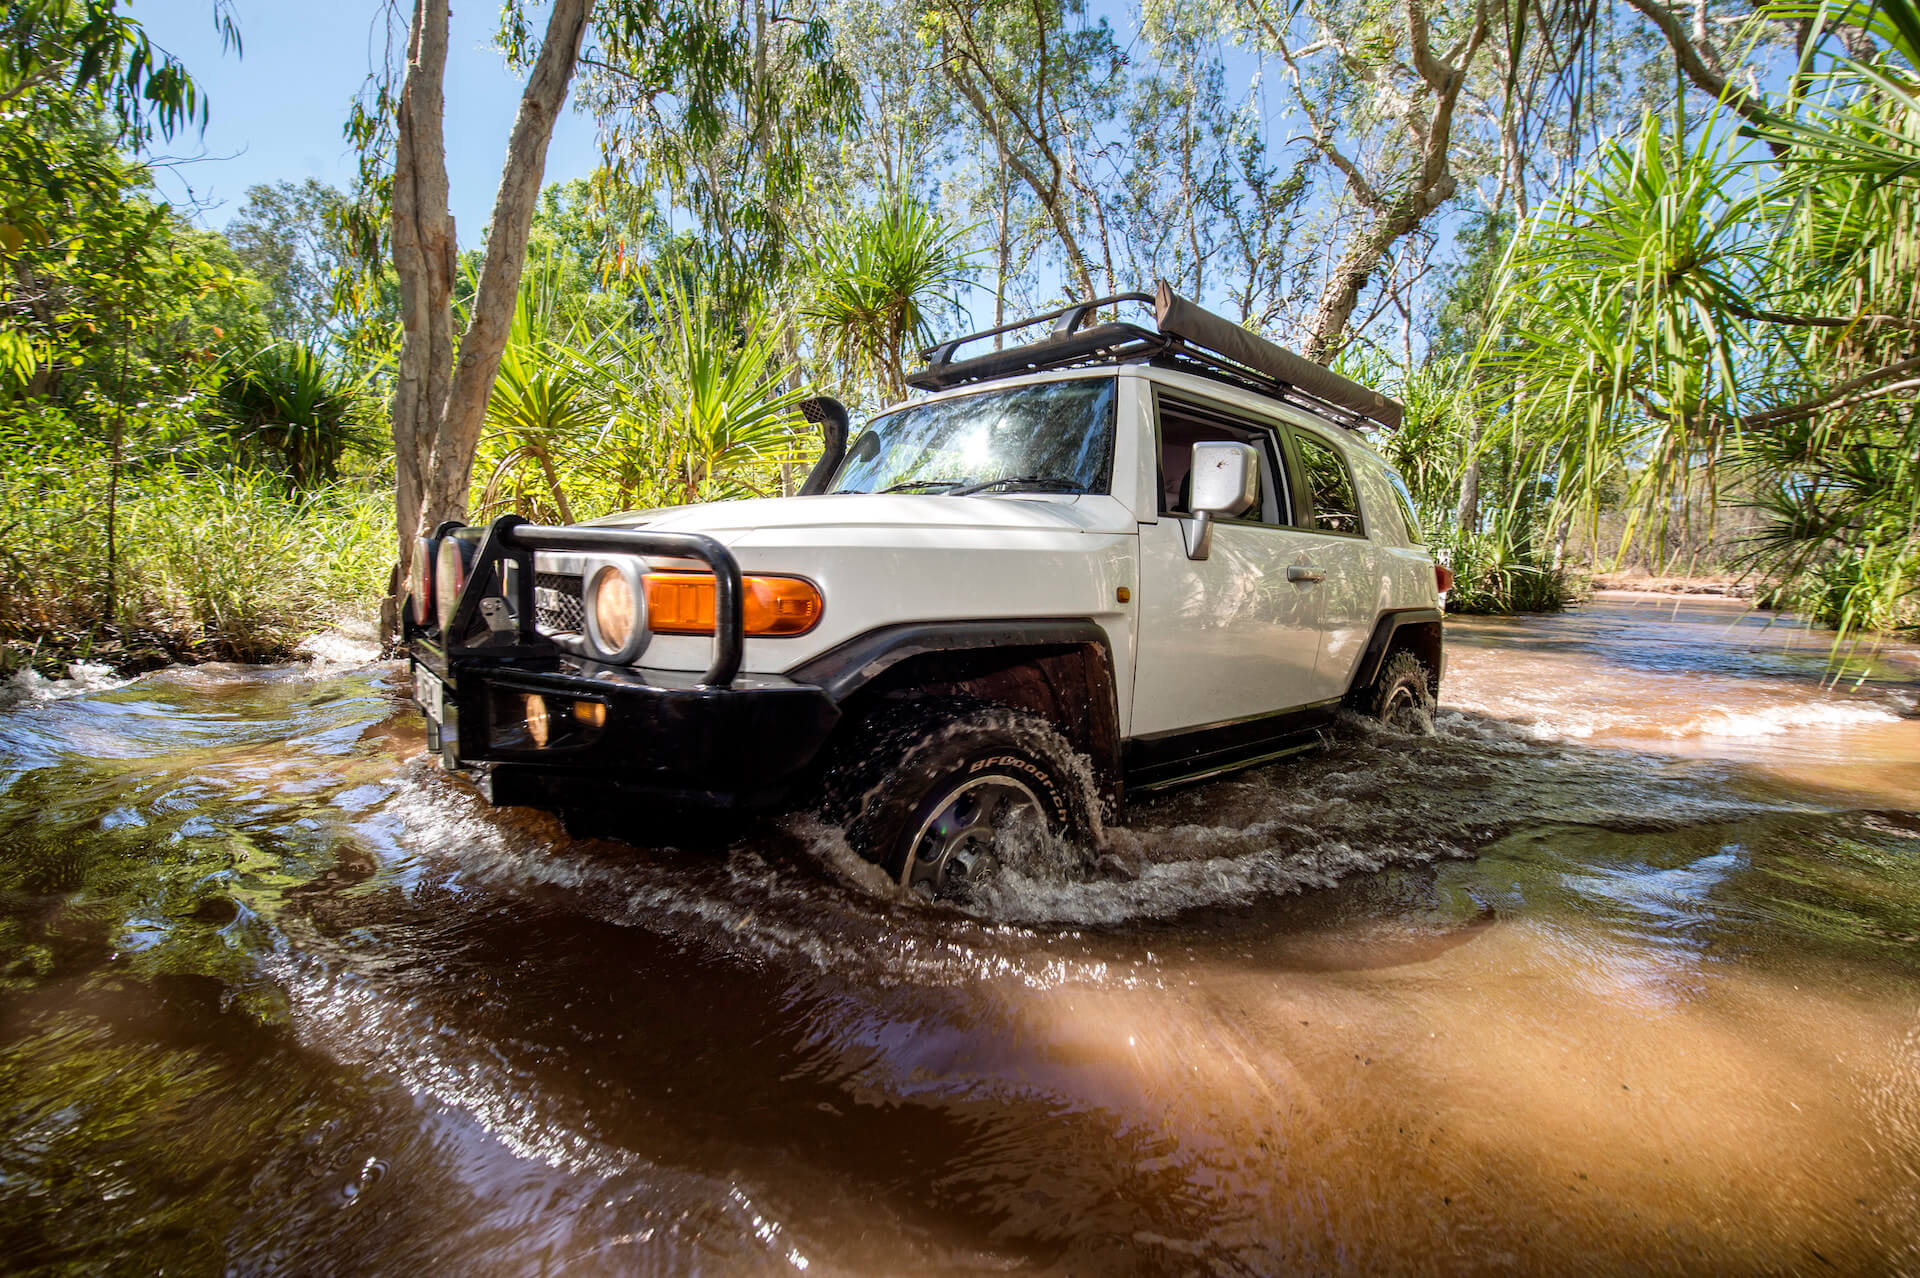 White Pickup Truck In Shallow Jungle Pond, Litchfield, Credit Tourism NT Shaana McNaught.